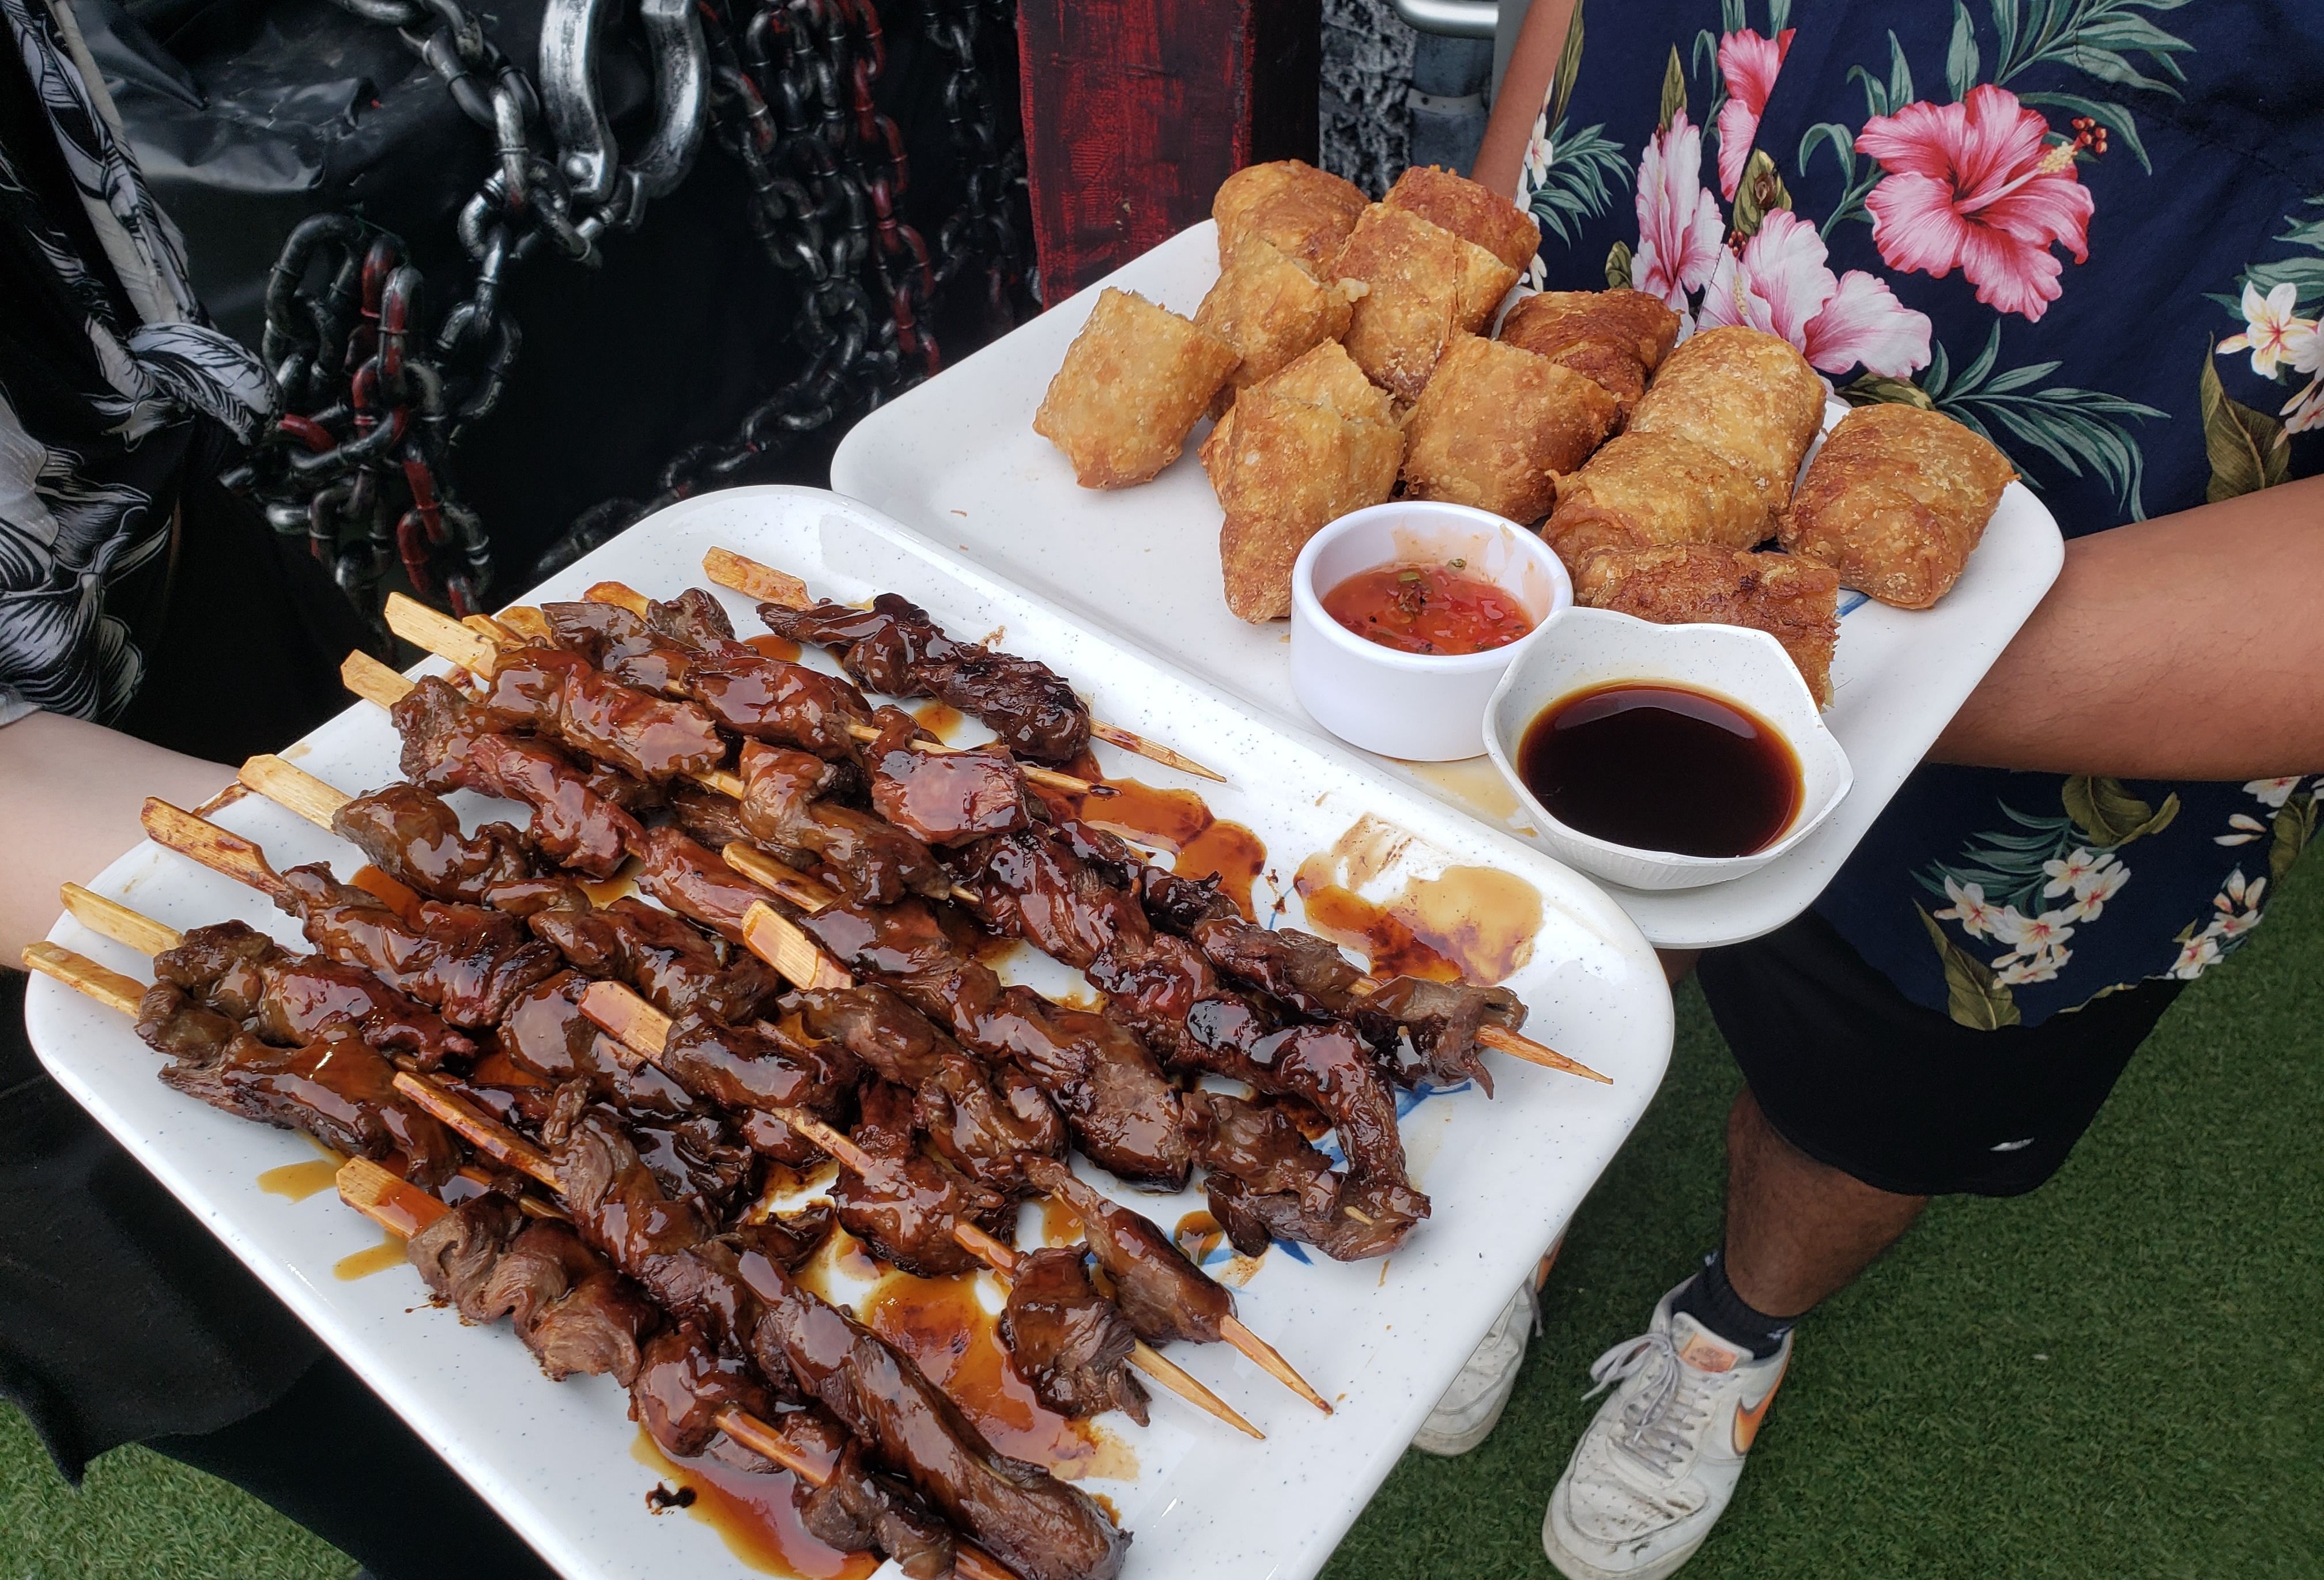 Meat skewers on white plate next to egg rolls with two dishes of sauce on white plate.